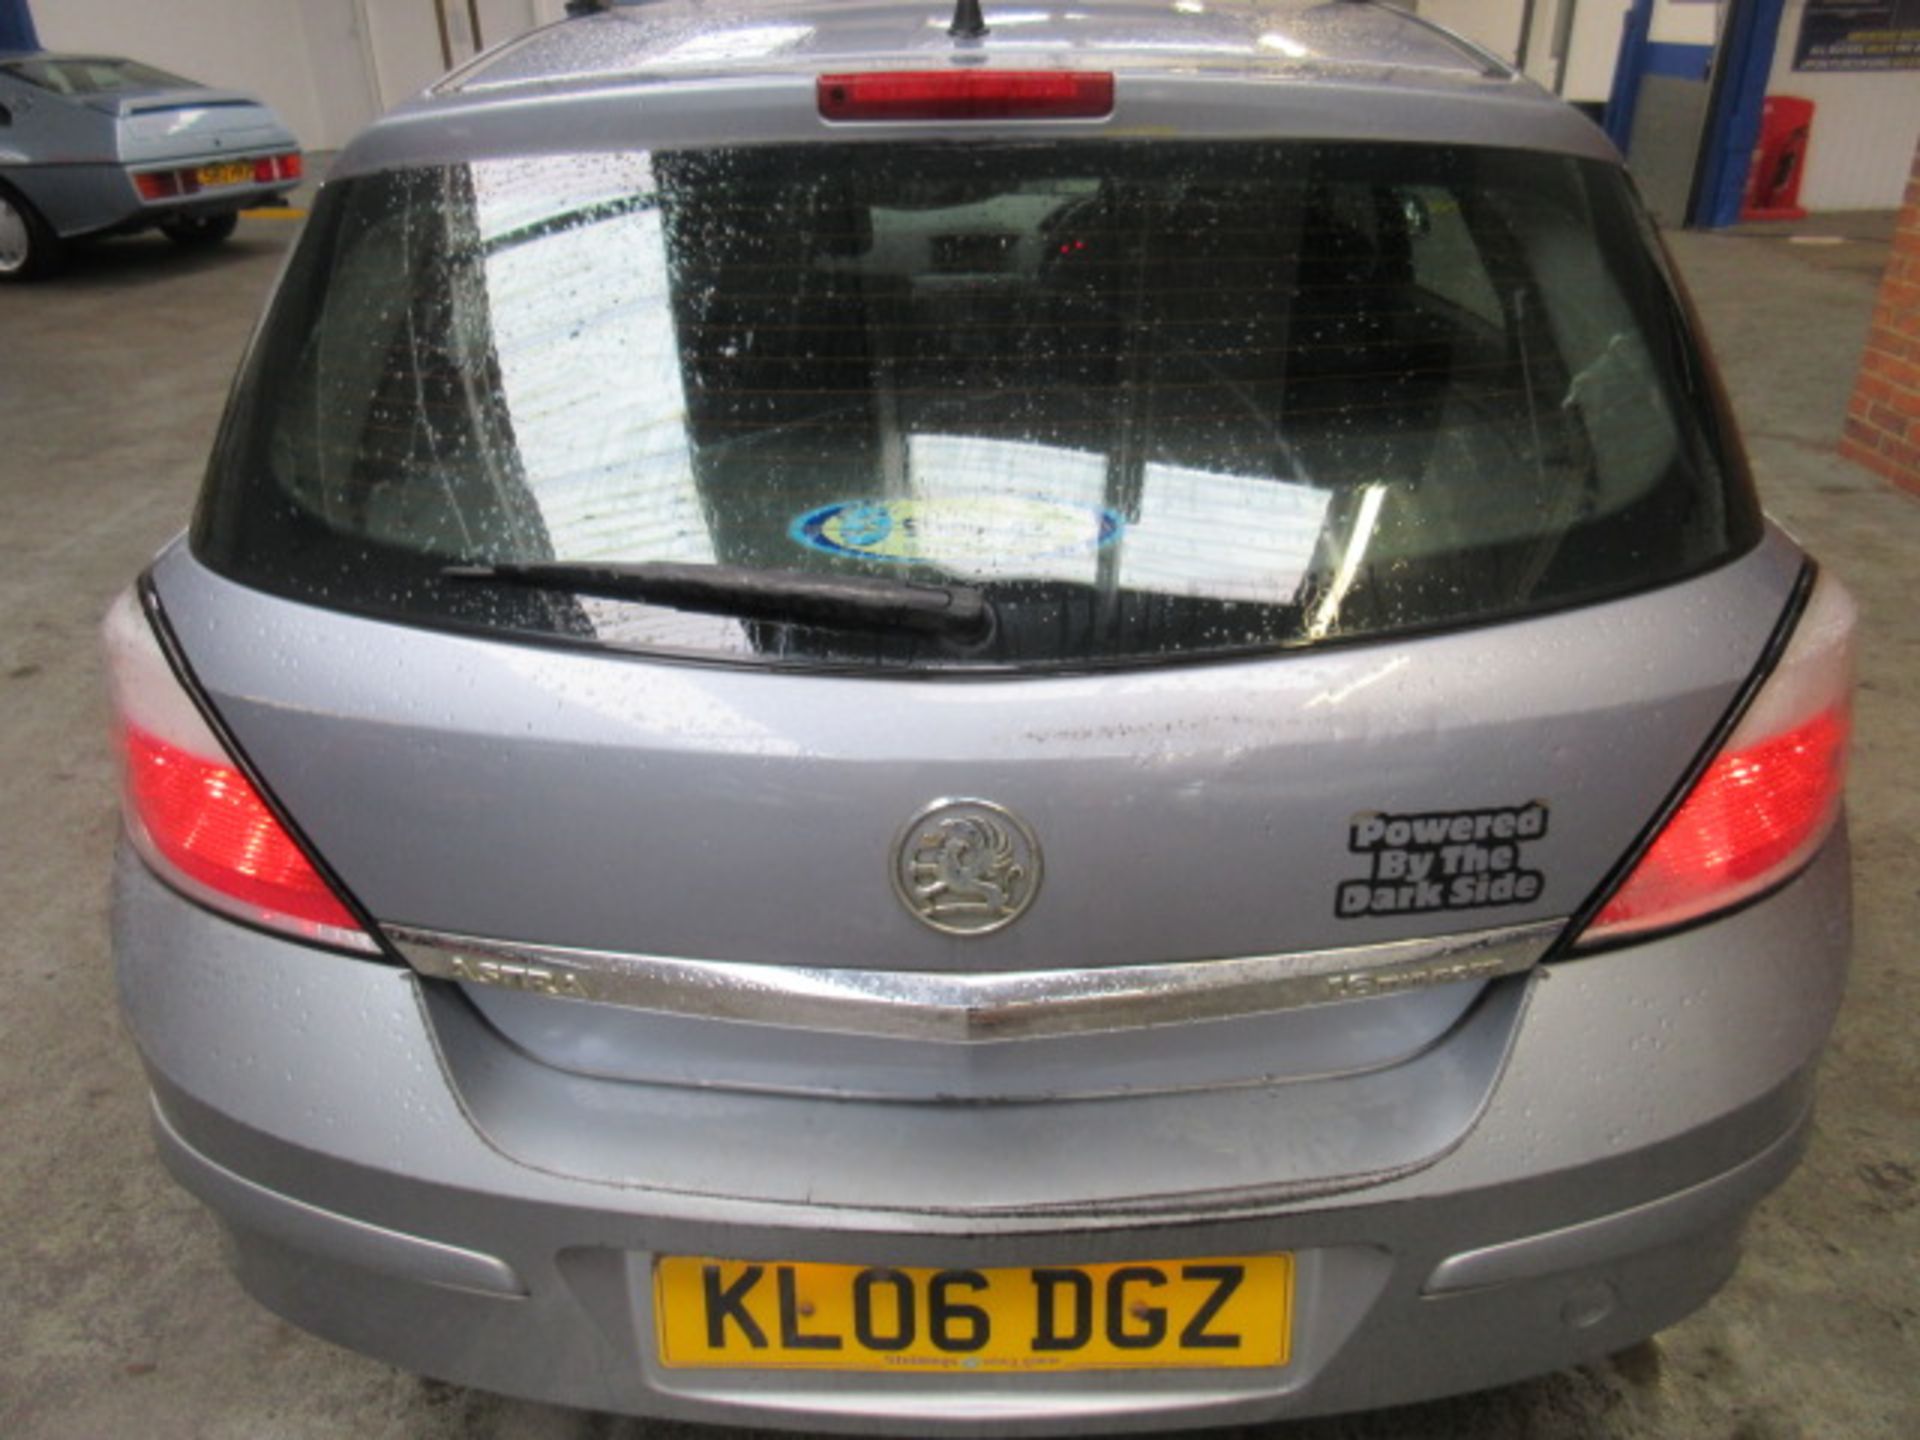 06 06 Vauxhall Astra Design Twinport - Image 6 of 24